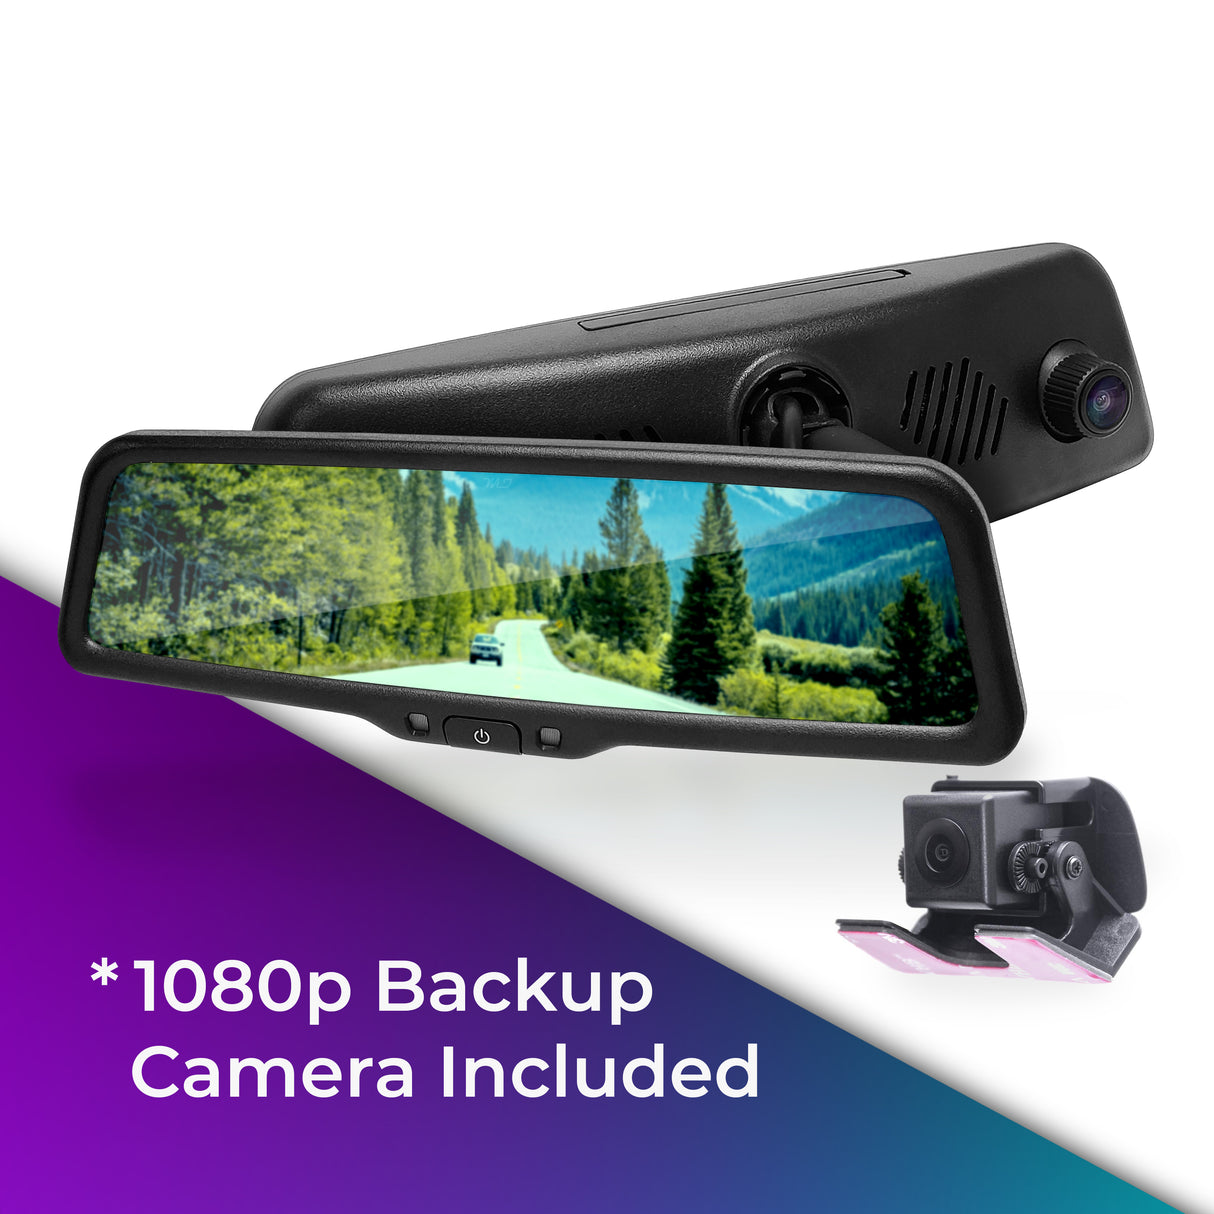 10'' Full HD Touch Screen Rear View Mirror Dash Cam - Front and Rear Camera  With Loop Recording, G-Sensor, Parking Monitor, 170° Wide Angle